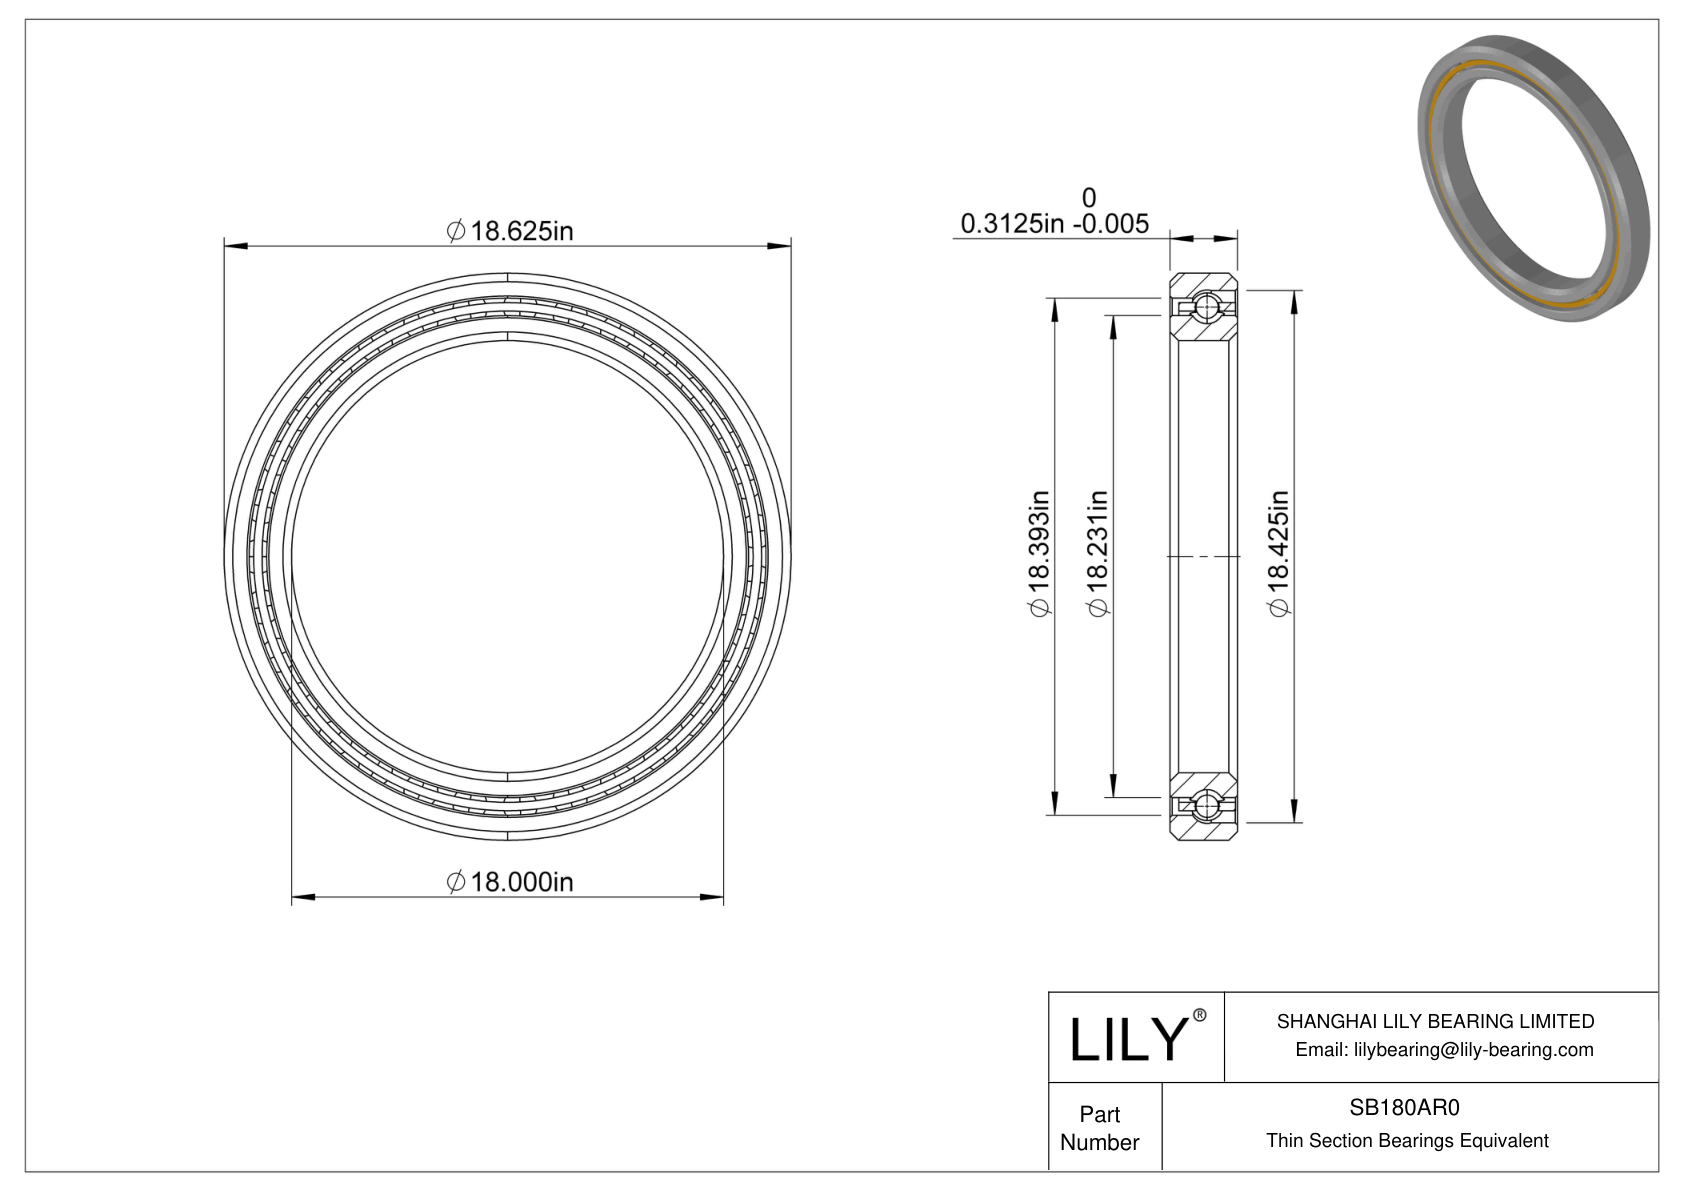 SB180AR0 Constant Section (CS) Bearings cad drawing